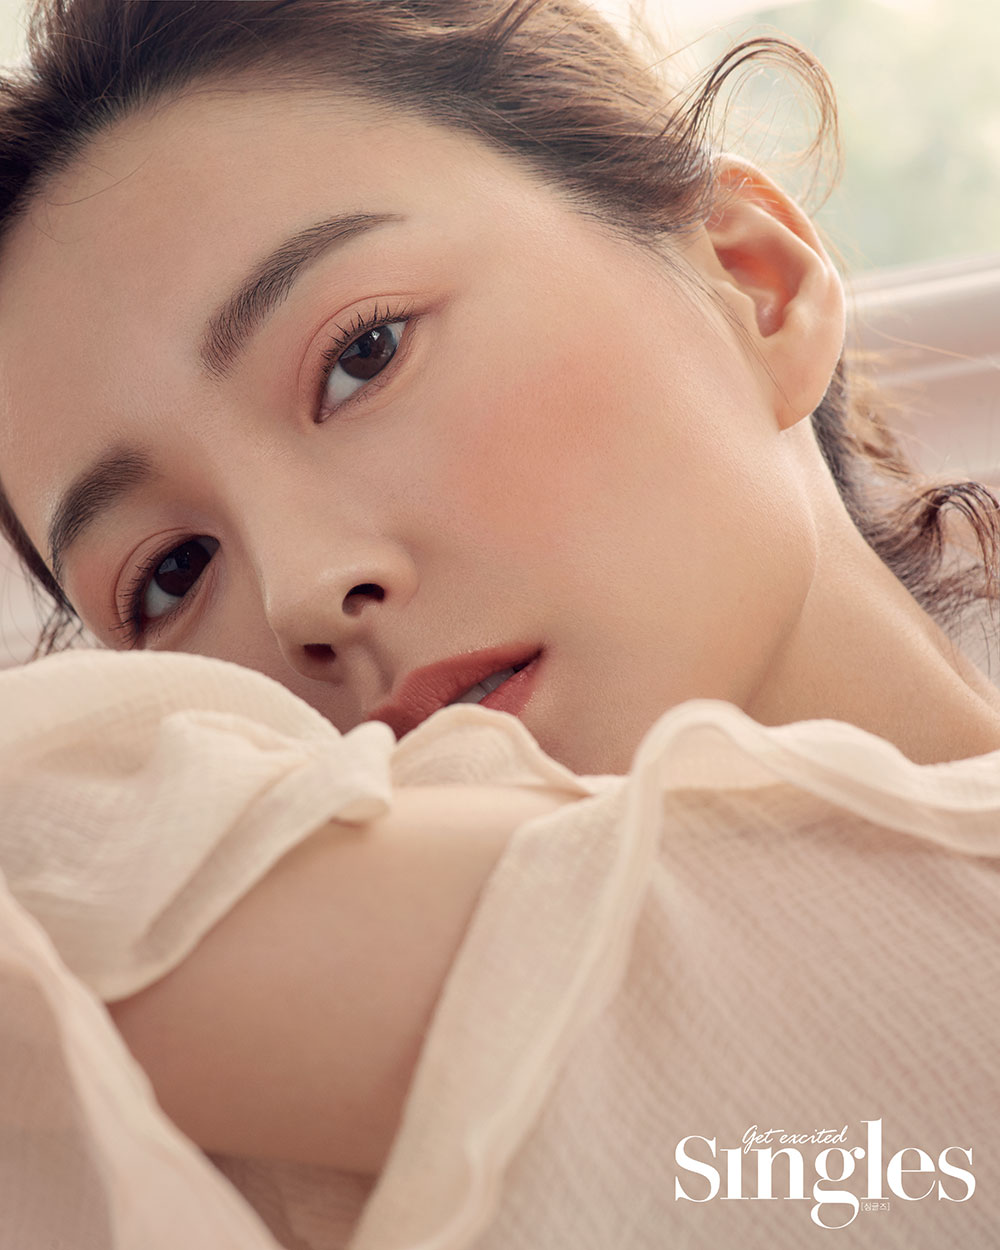 Actress Jung Yu-mi, who has been loved by various charms, has been released through Singles.In particular, this picture featured the cover of the September issue of Singles.In this picture, actor Jung Yu-mi is a back door that has been fully digested from various concepts ranging from chic and elegant to modern feeling with make-up using soft MLB Ginger color blusher and received praise from the staff of the filming site.Actor Jung Yu-mi played the role of new policeman Han Jeong-oh in the drama Live, which ended in May with a lot of love, convincingly acting the inside of a complex figure and leading the sympathy of many viewers.Actor Jung Yu-mi, who has expressed his character with his unique loveliness and has established the position of Roco Queen with the nickname Blee, has earned a reputation that he can fully digest the genre.Roco-myeon Roco, genre-style genre, and colorful charm actor Jung Yu-mis pictorials that digest all concepts and roles can be found in the September issue of Singles for imposing singles and the pleasant online playground Singles mobile.Photo: Singles